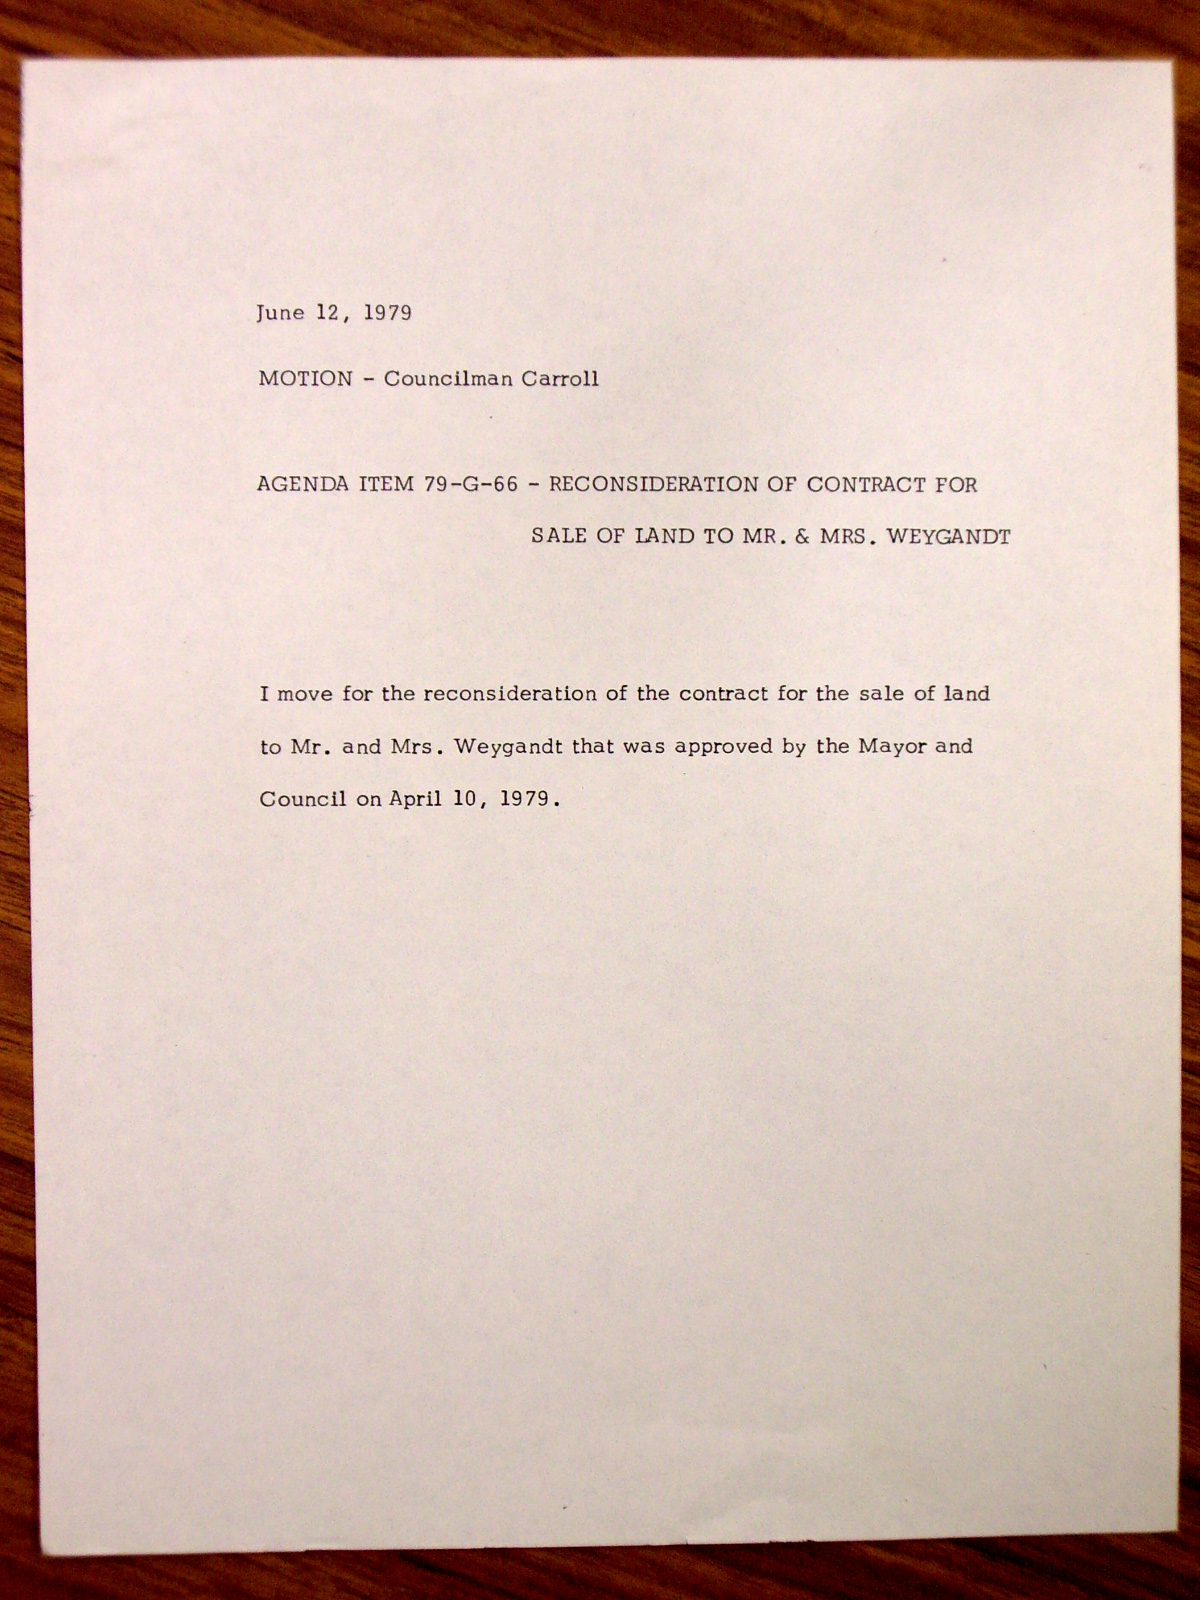 Motion 79-G-66 Reconsideration of Contract for Sale of land to Mr. and Mrs. Weygandt